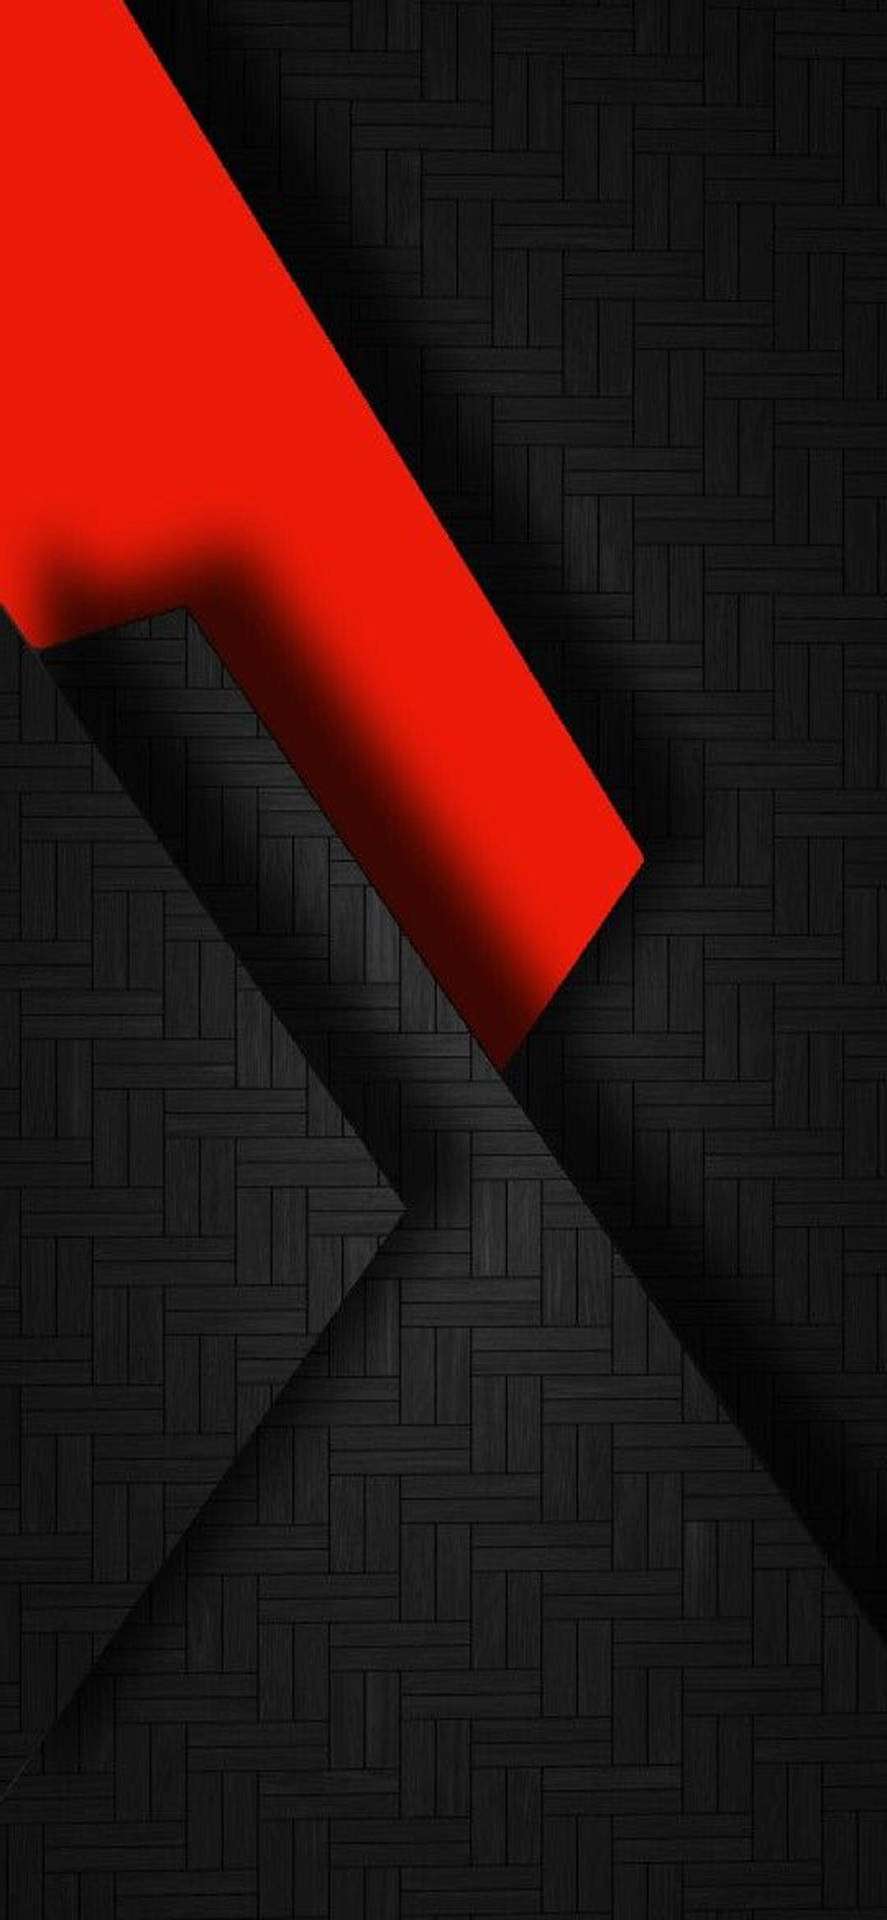 Show off your new iPhone X with this simple, clean black and red design. Wallpaper